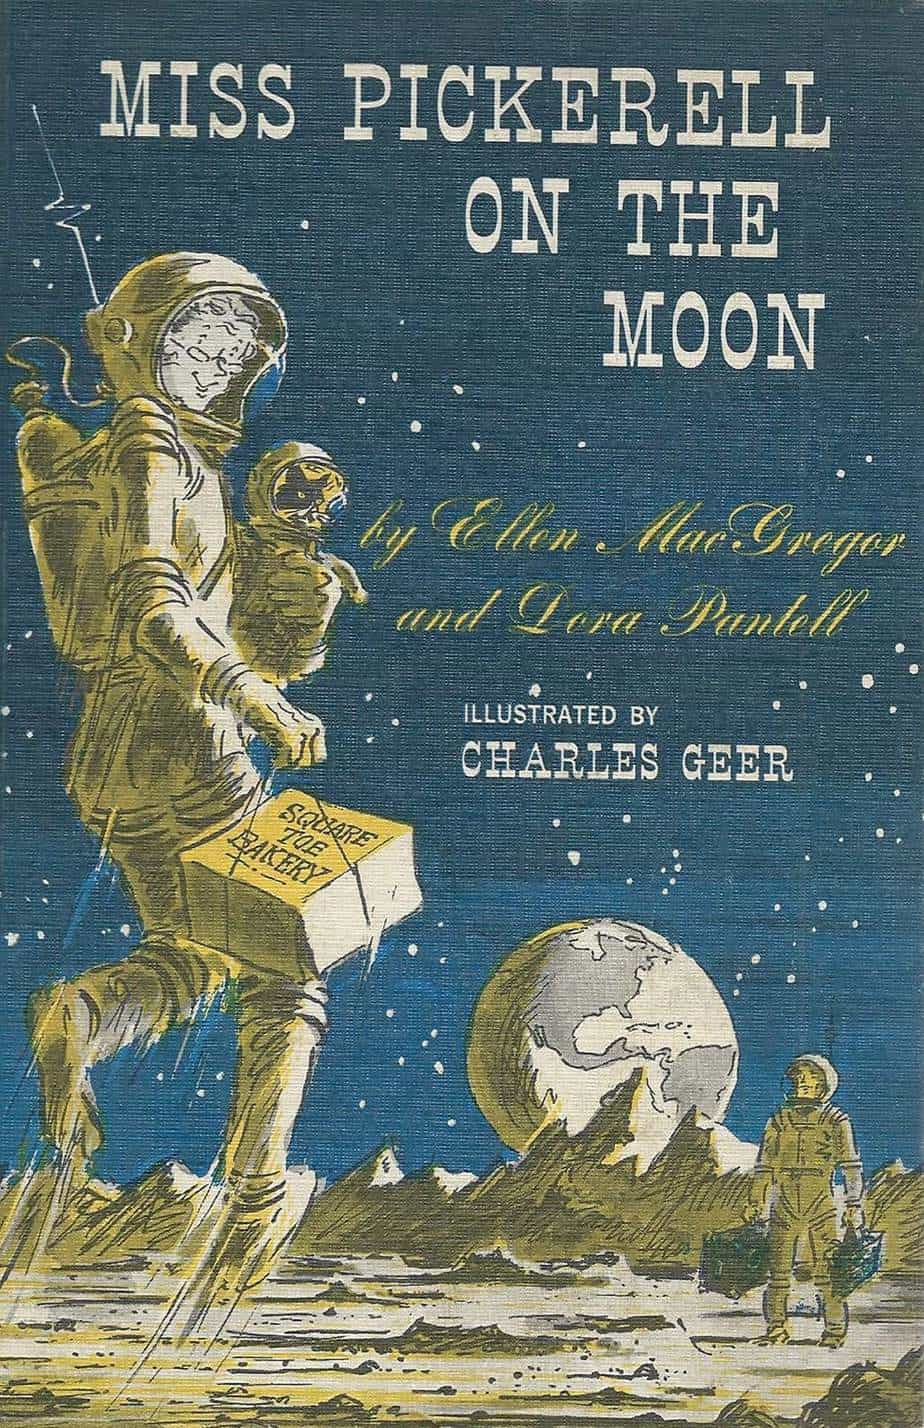 Miss Pickerell On The Moon by Ellen MacGregor, Dora Pantell and Charles Geer 1965